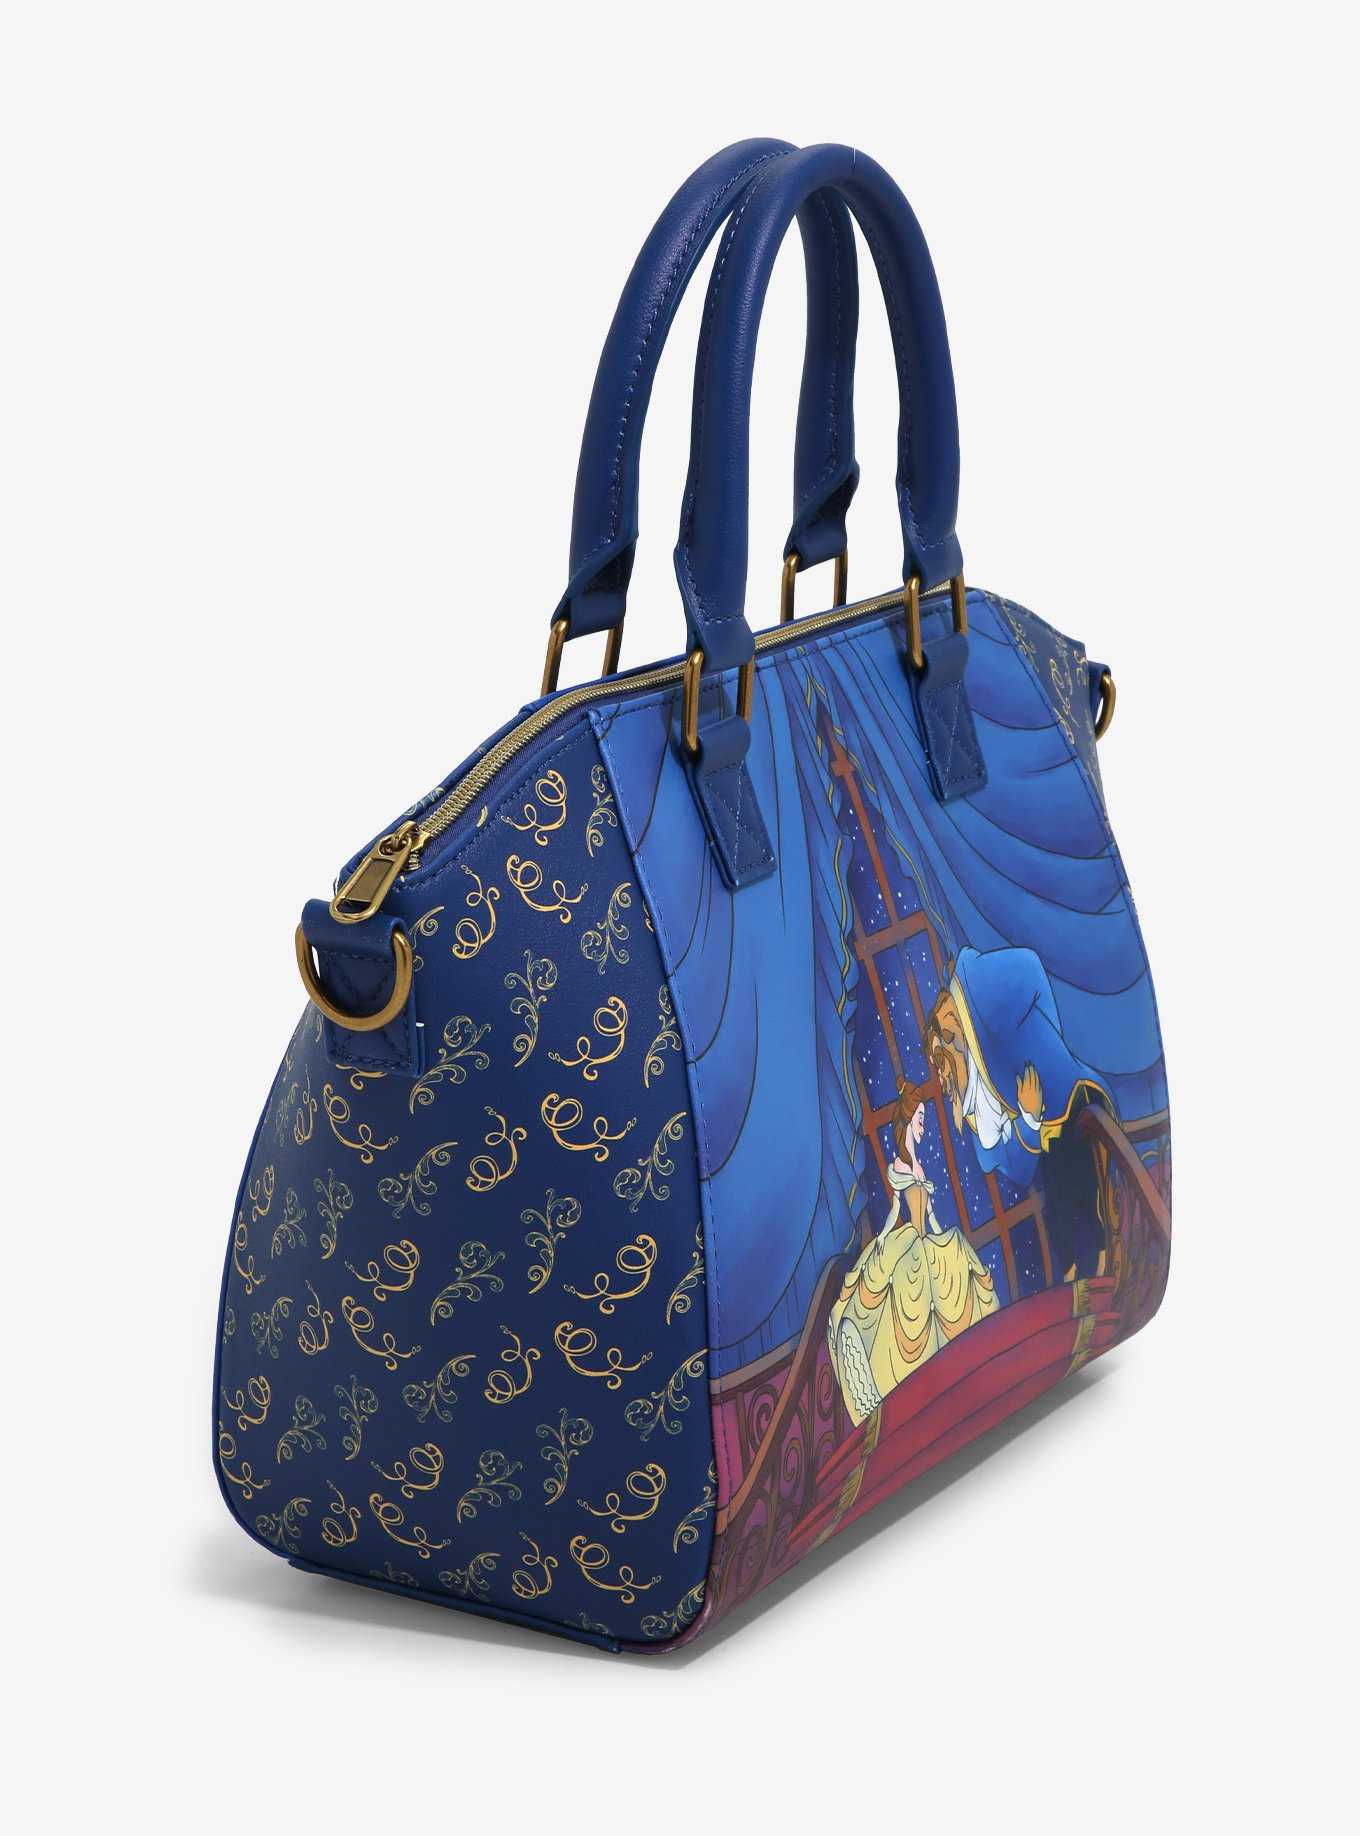 Loungefly Disney Beauty And The Beast Staircase Satchel Bag, , hi-res